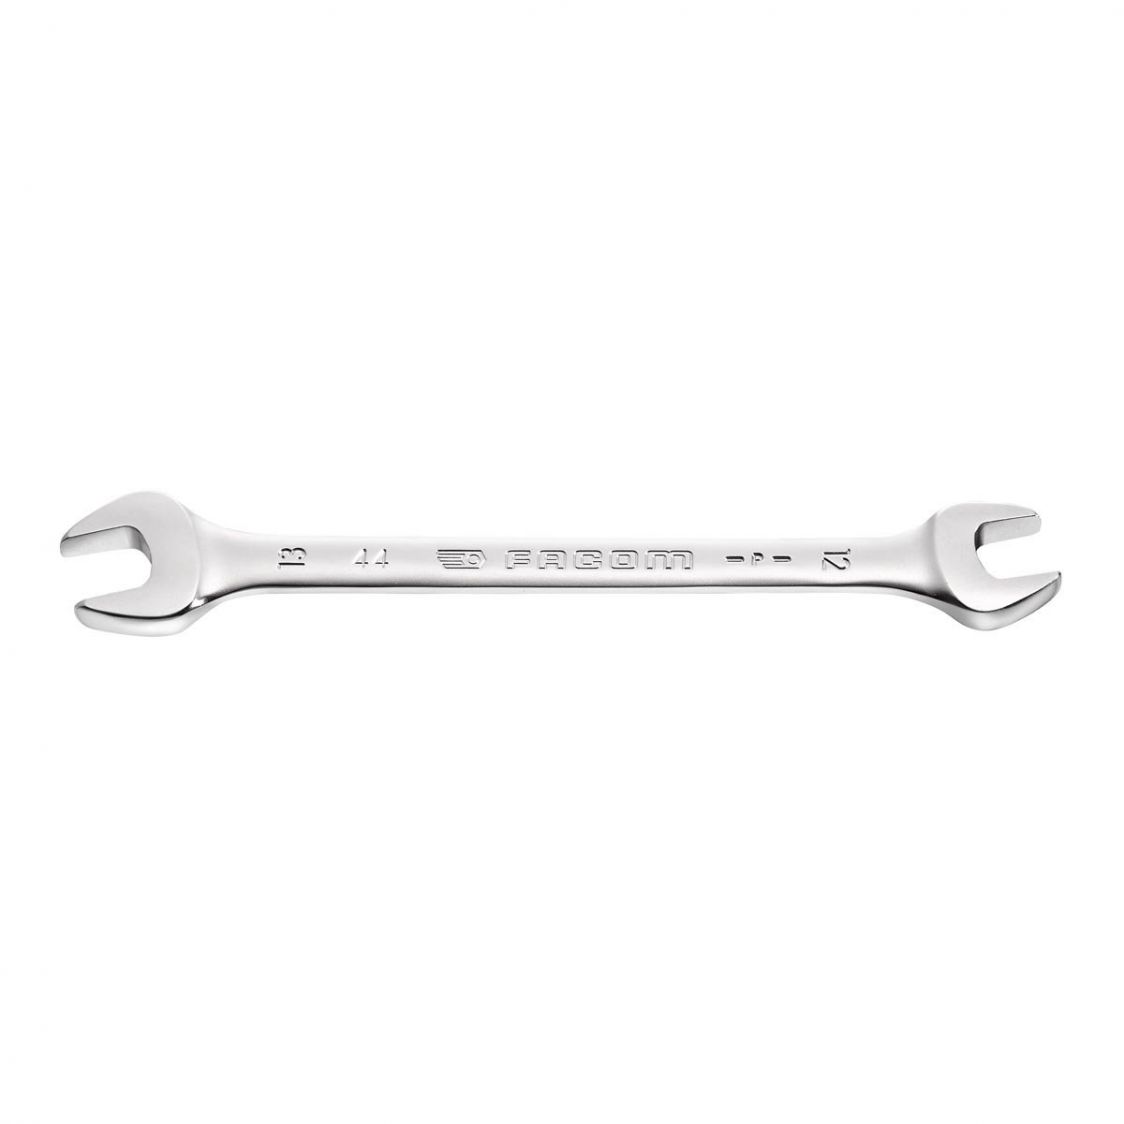 FACOM 44.14X15 - 14x15mm Metric Open Jaw Spanner